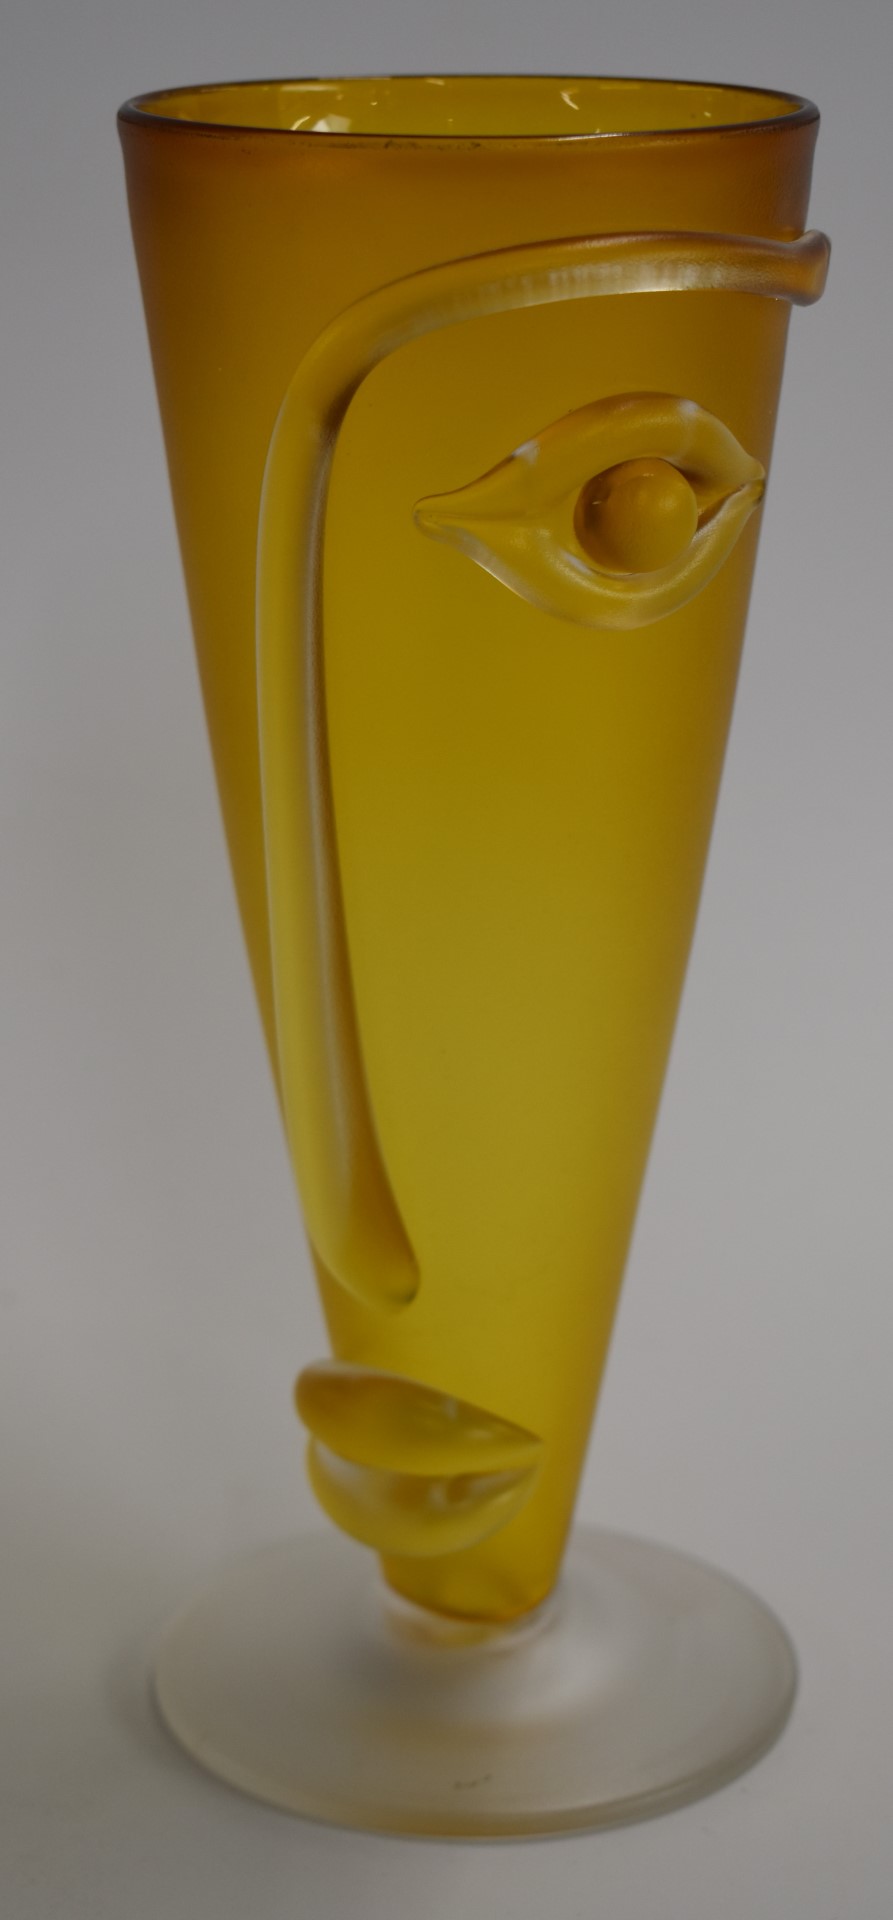 Blowzone glass 'face' vase in yellow from the Visage series, 20.5cm tall, and a Blowzone Gecko on - Image 3 of 5